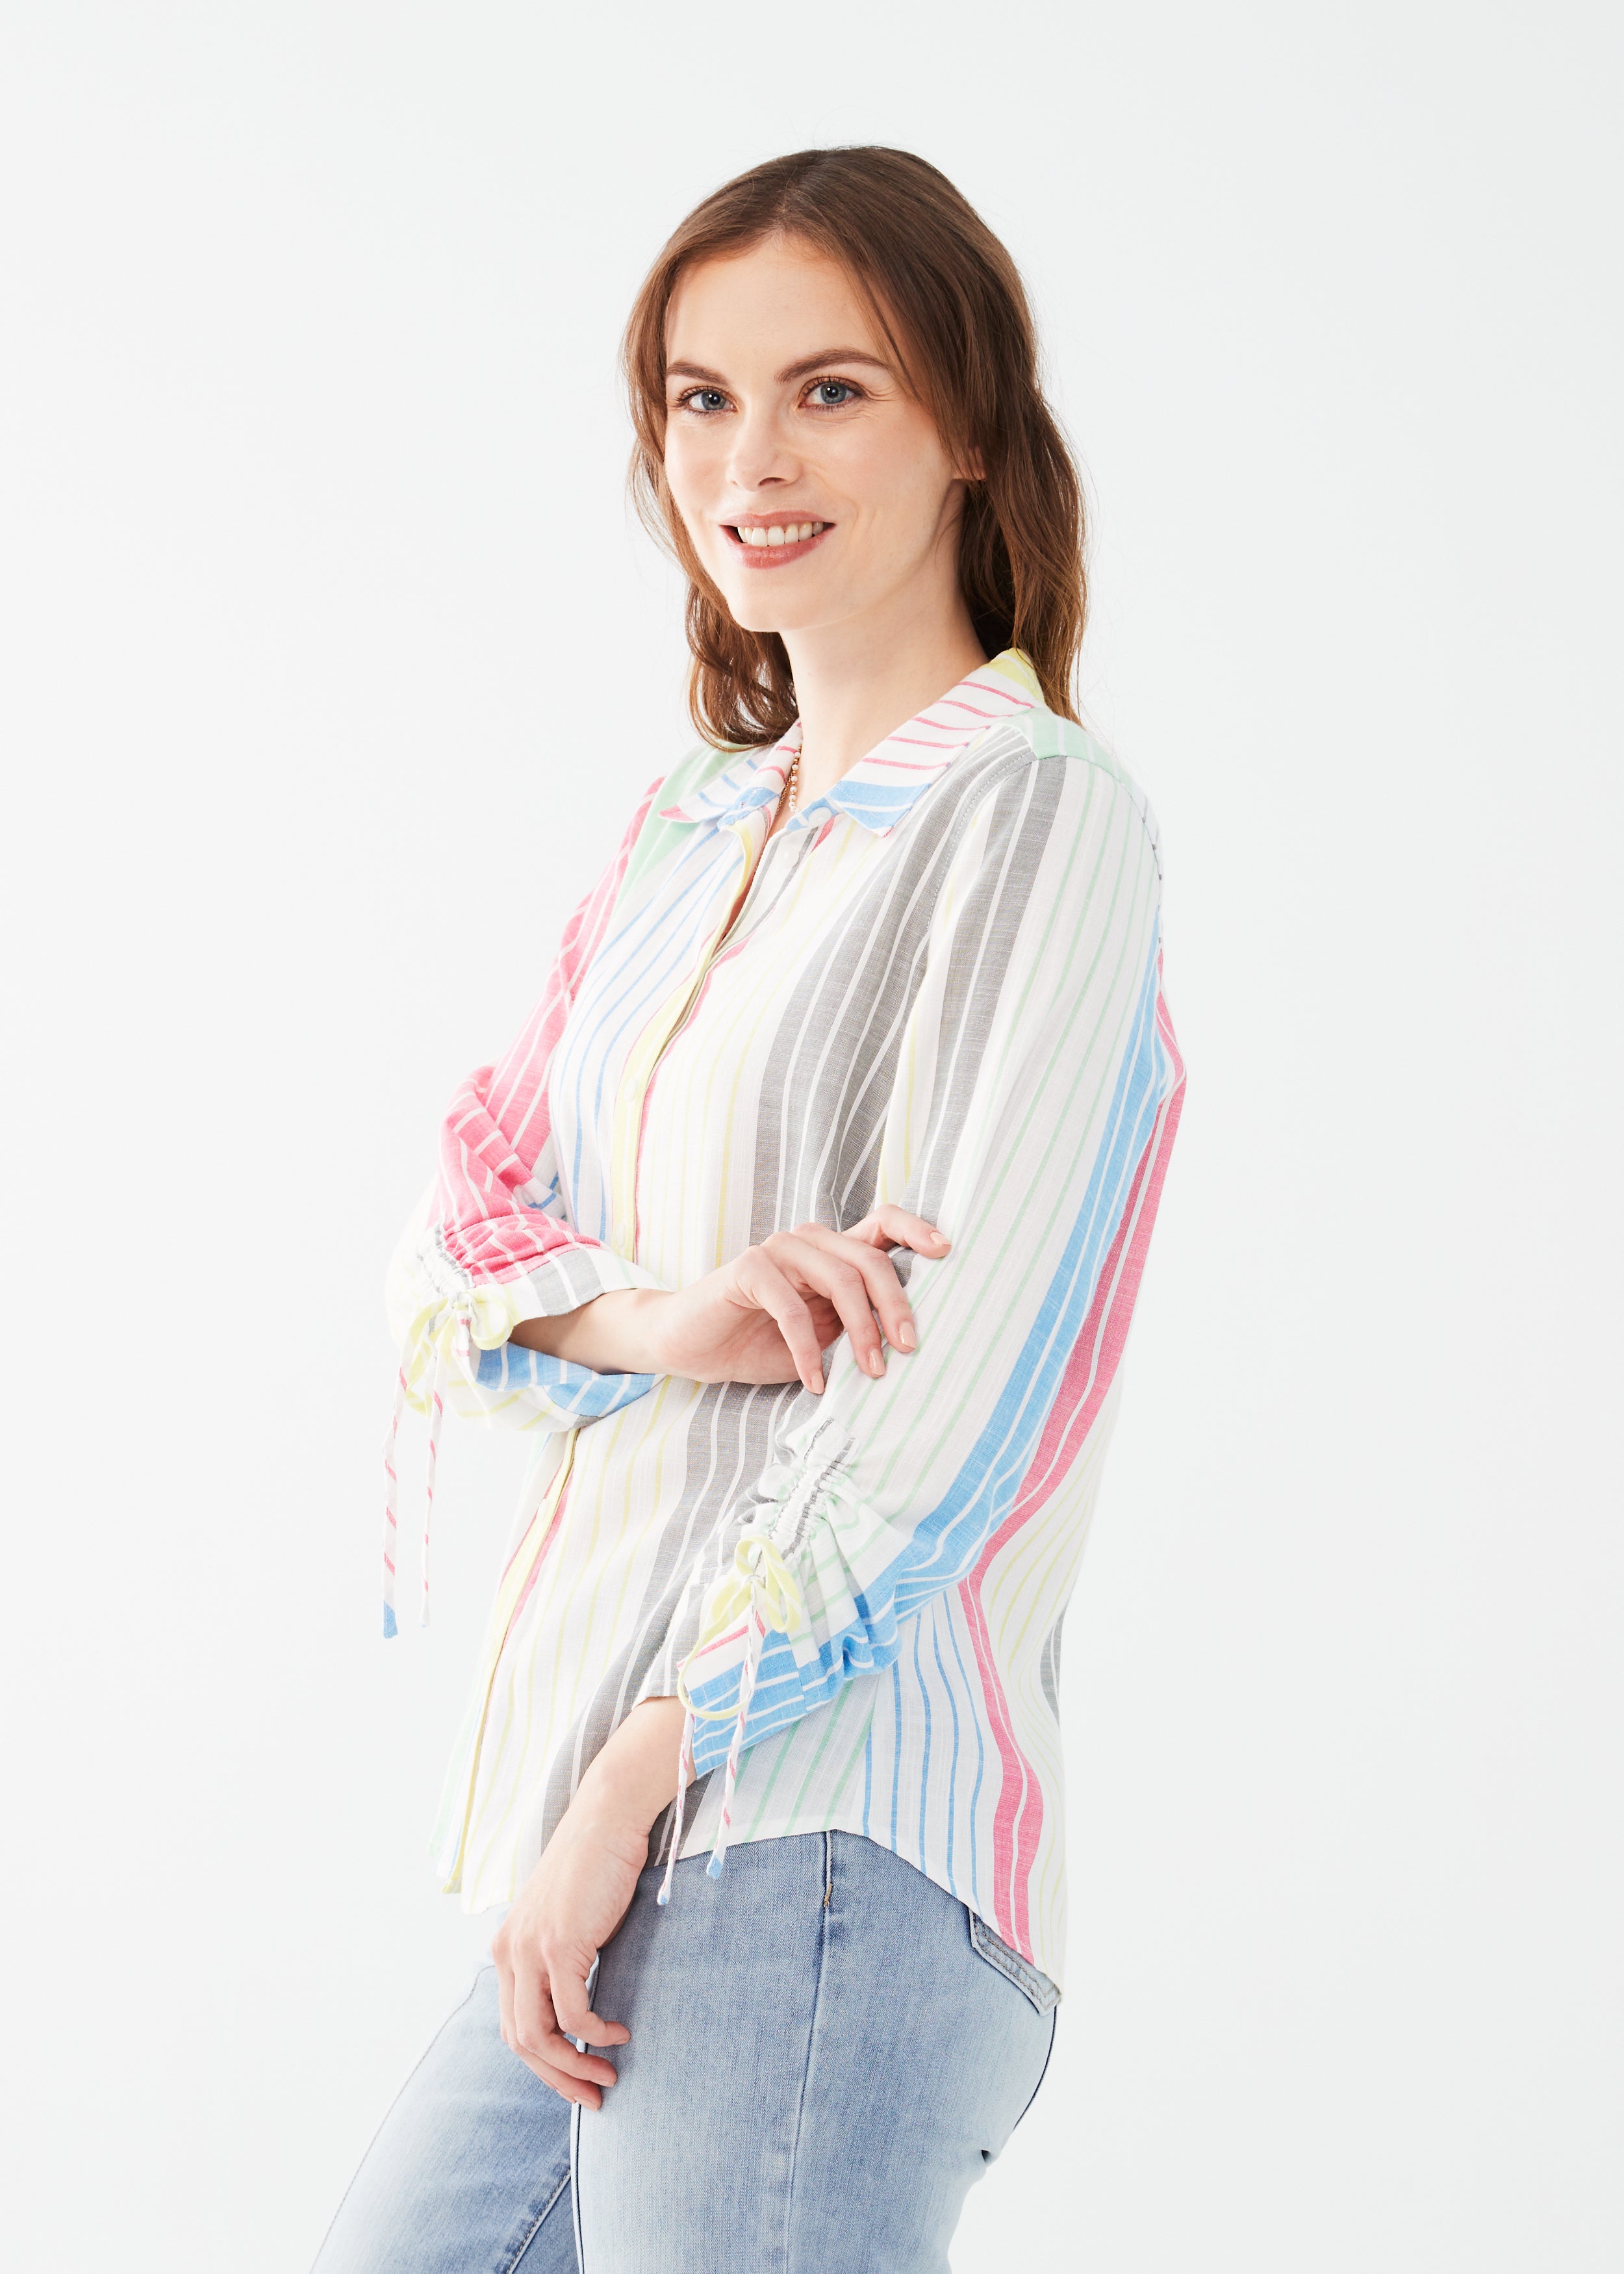 Classic Rainbow Striped Button Up Shirt by FDJ